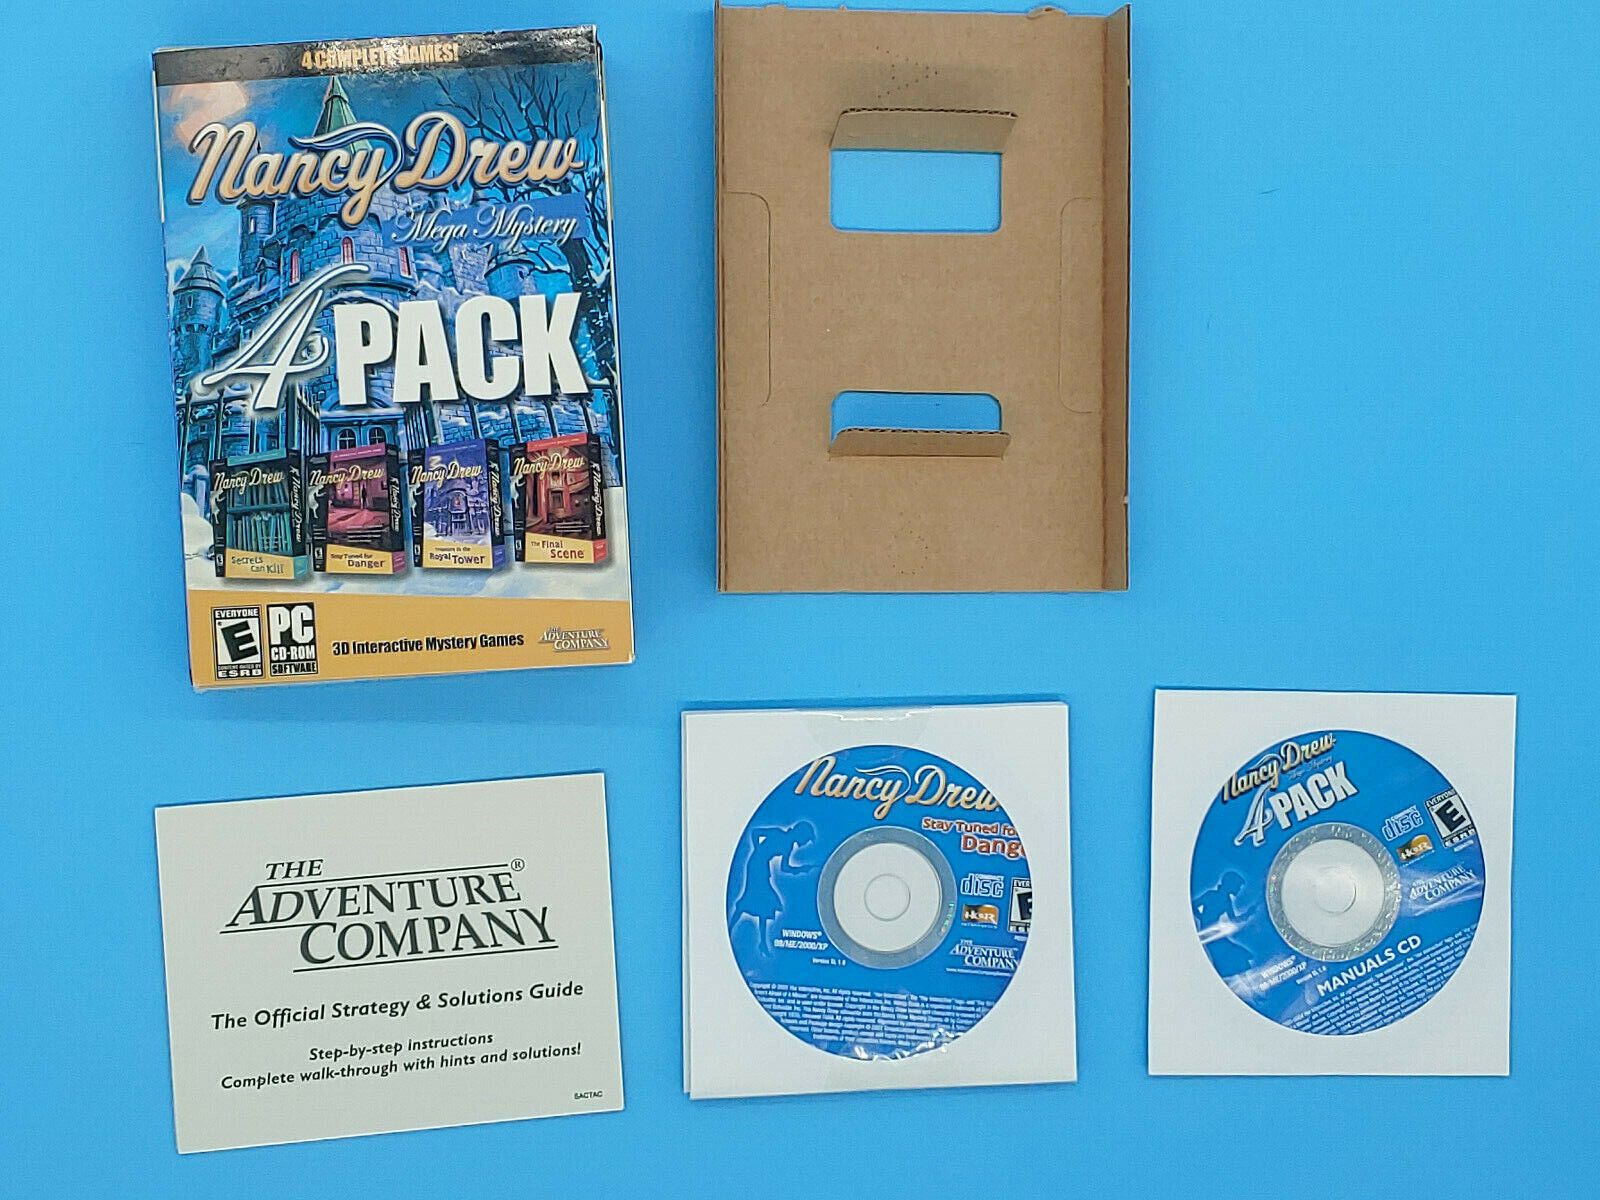 Nancy Drew Mega Mystery 4 Complete Games Pack 3-D Interactive Mystery PC CD-Rom 